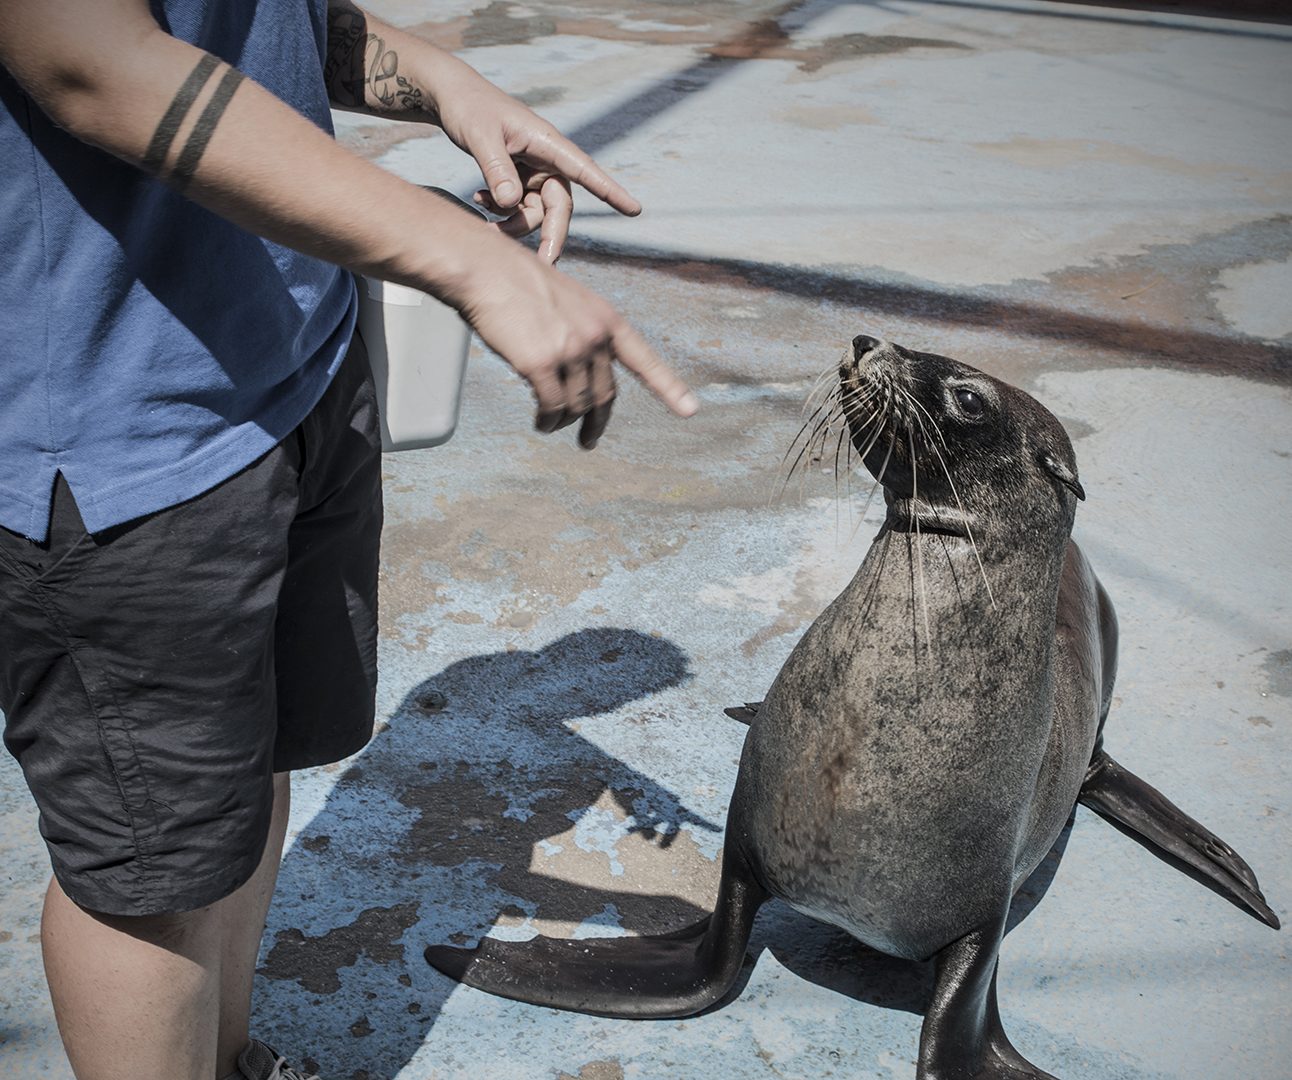 A seal sits at the side of a swimming pool with people pointing at it